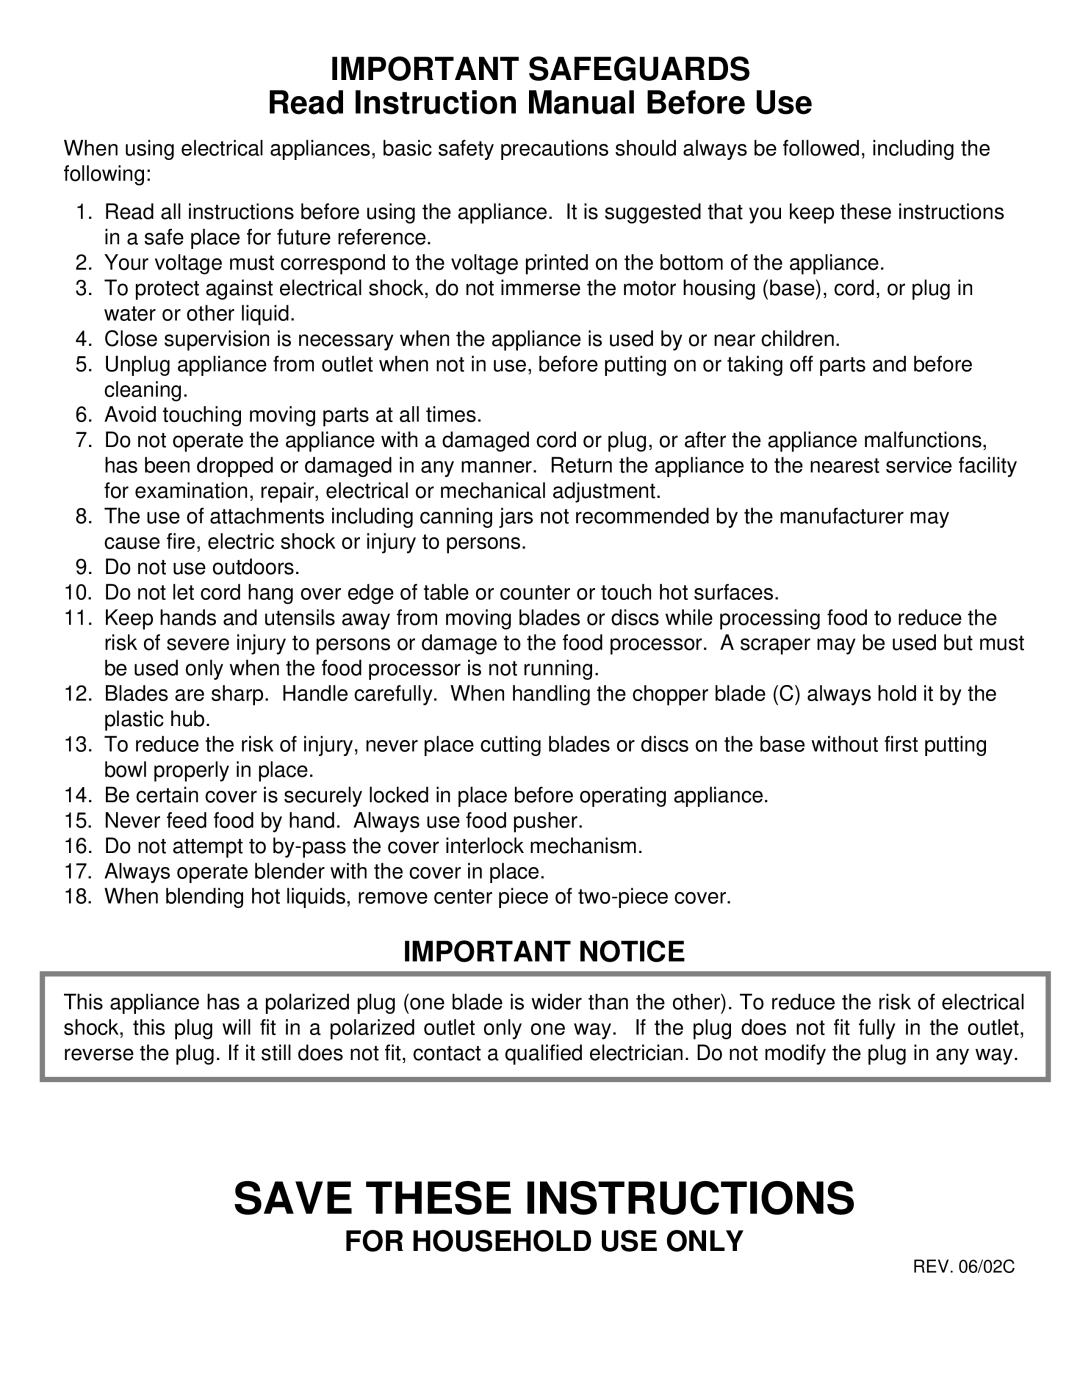 Bravetti BP100 instruction manual Save These Instructions, Important Notice, For Household Use Only, Important Safeguards 